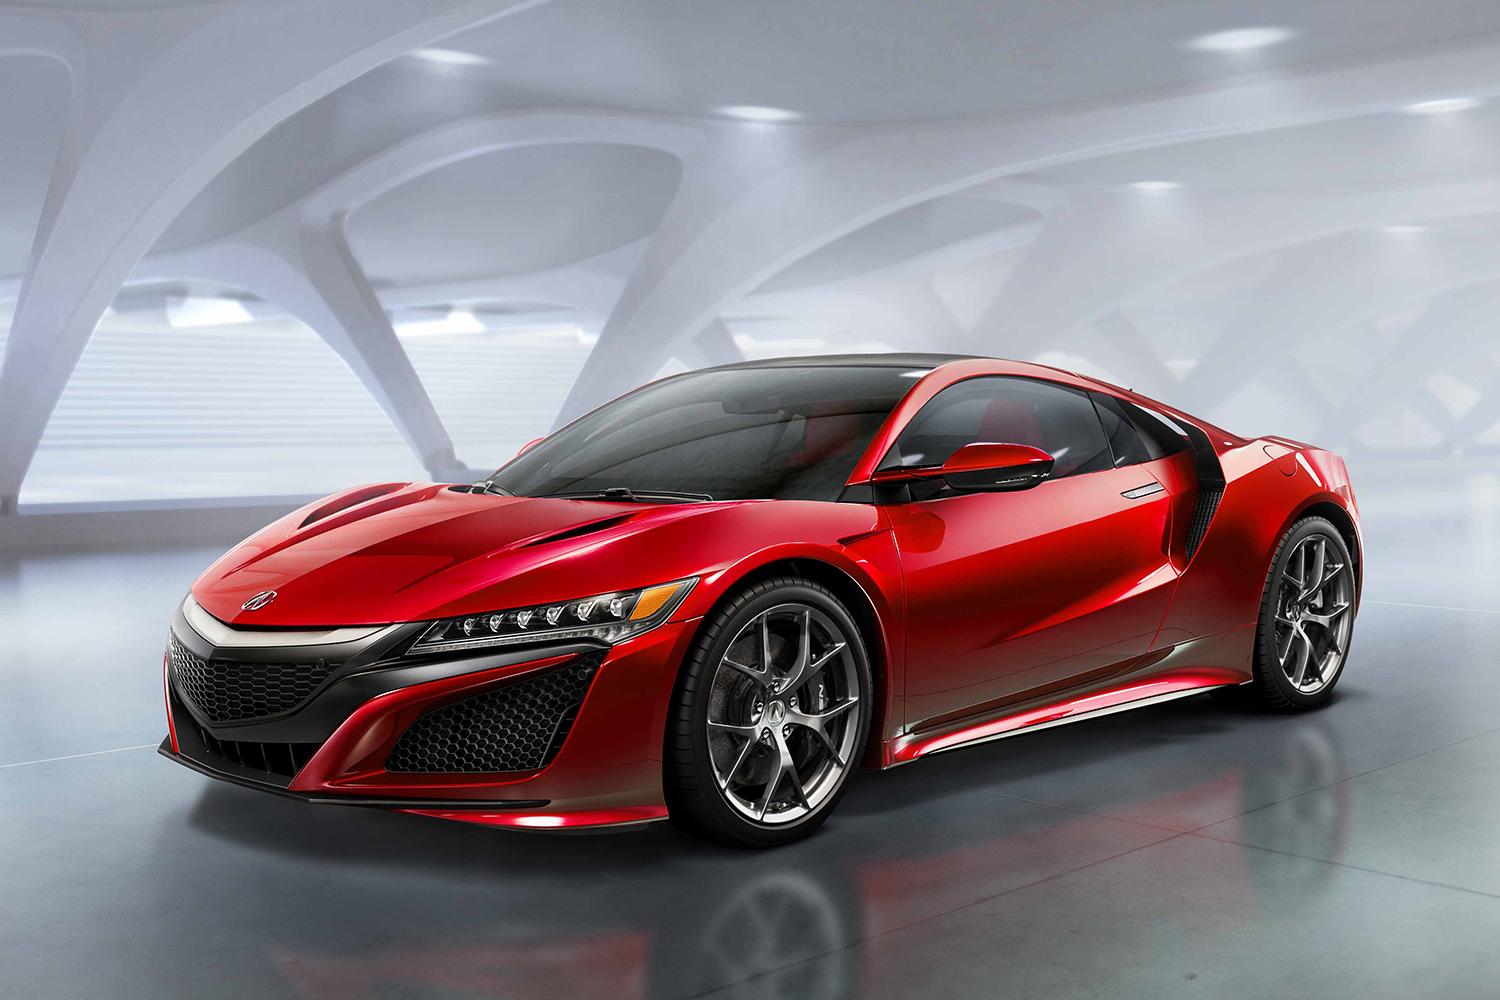 2016 acura nsx official specs pictures and performance reveal das2015 025